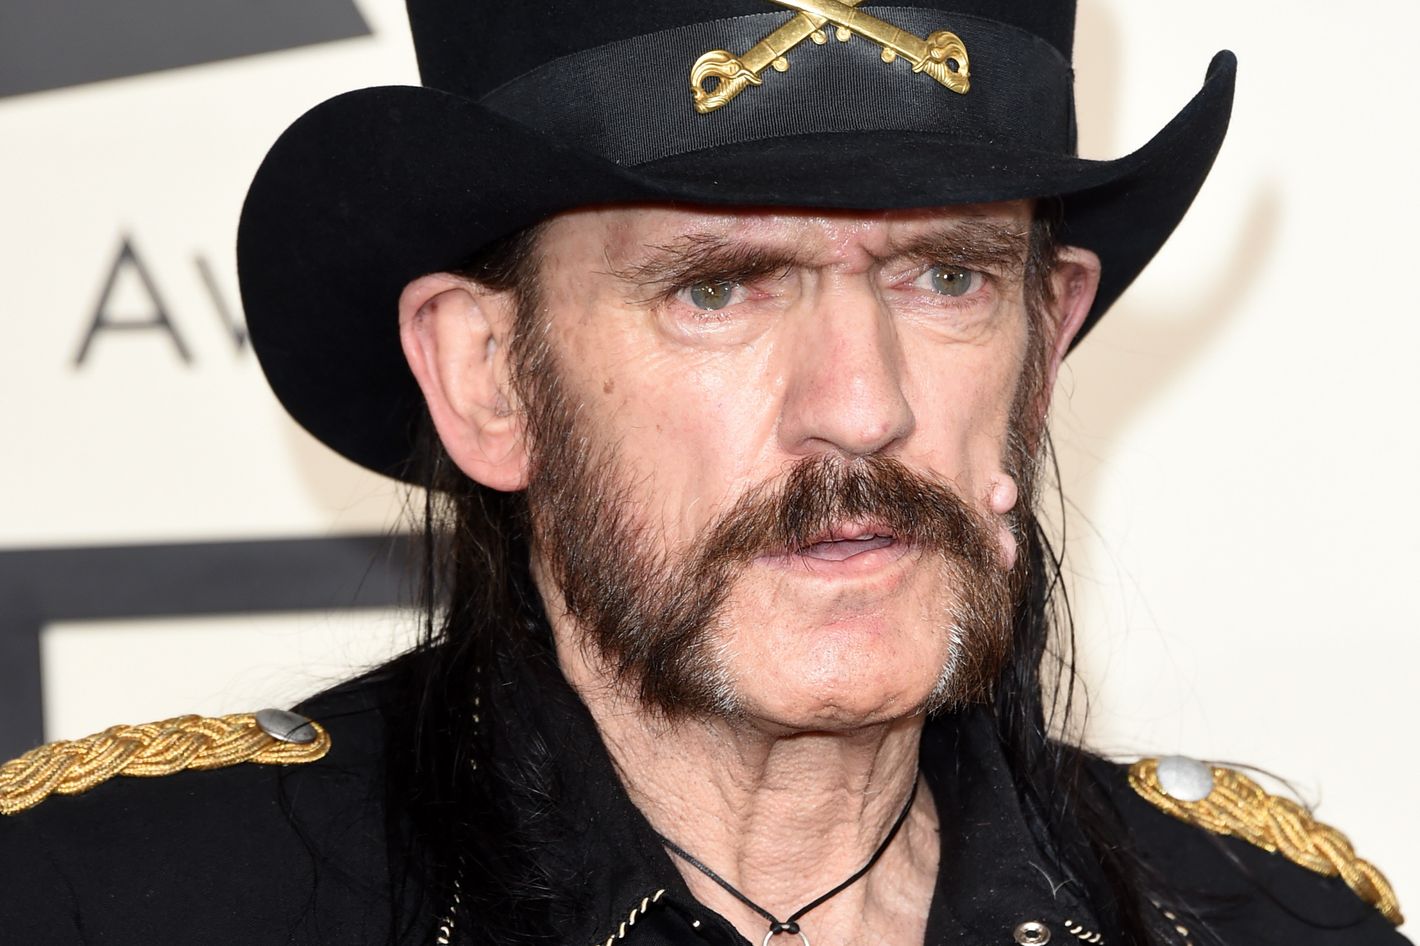 The Motörhead song that Lemmy had enough of